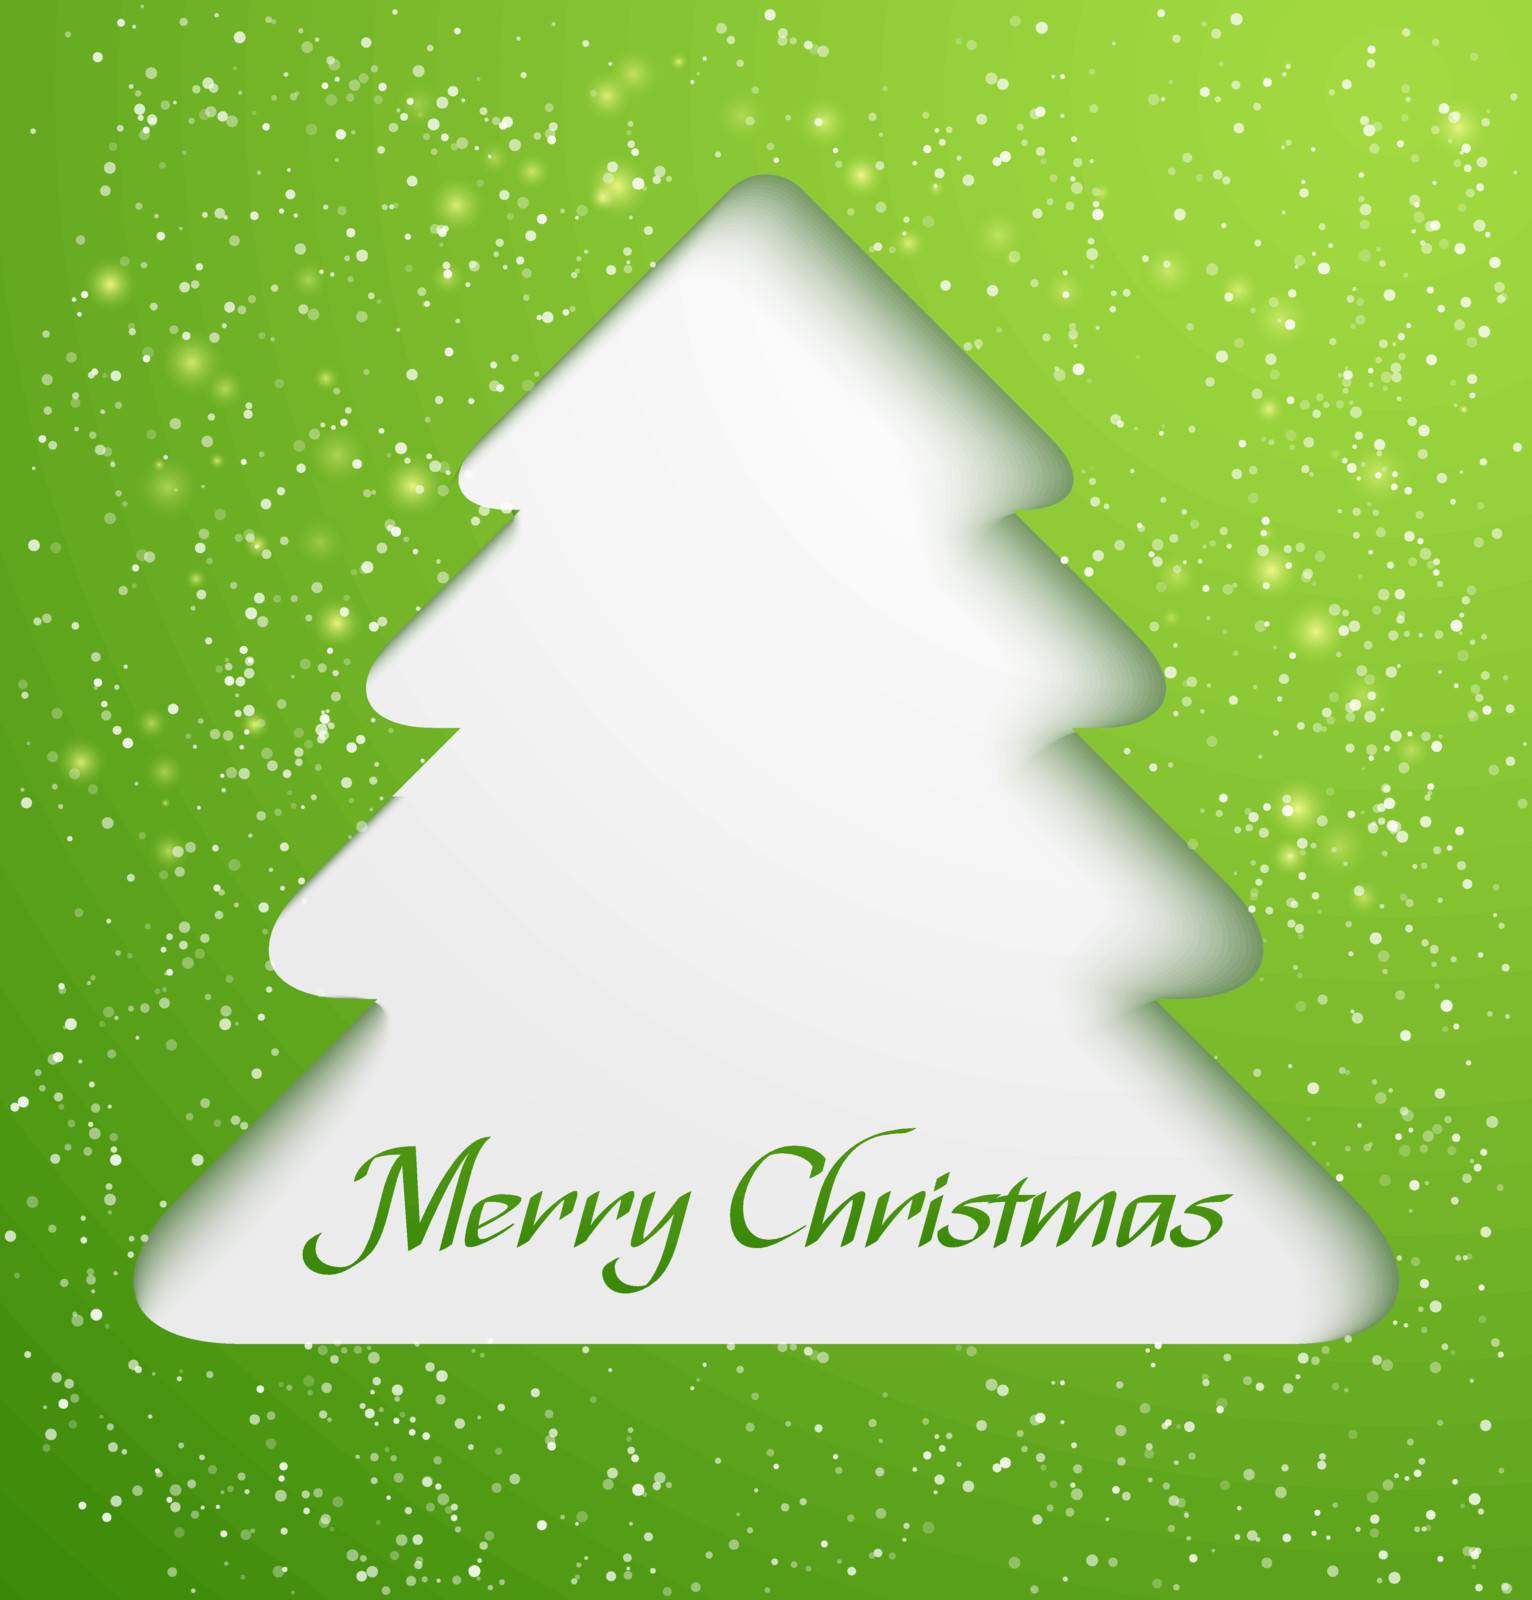 Green abstract christmas tree applique with snow particles. Vector illustration